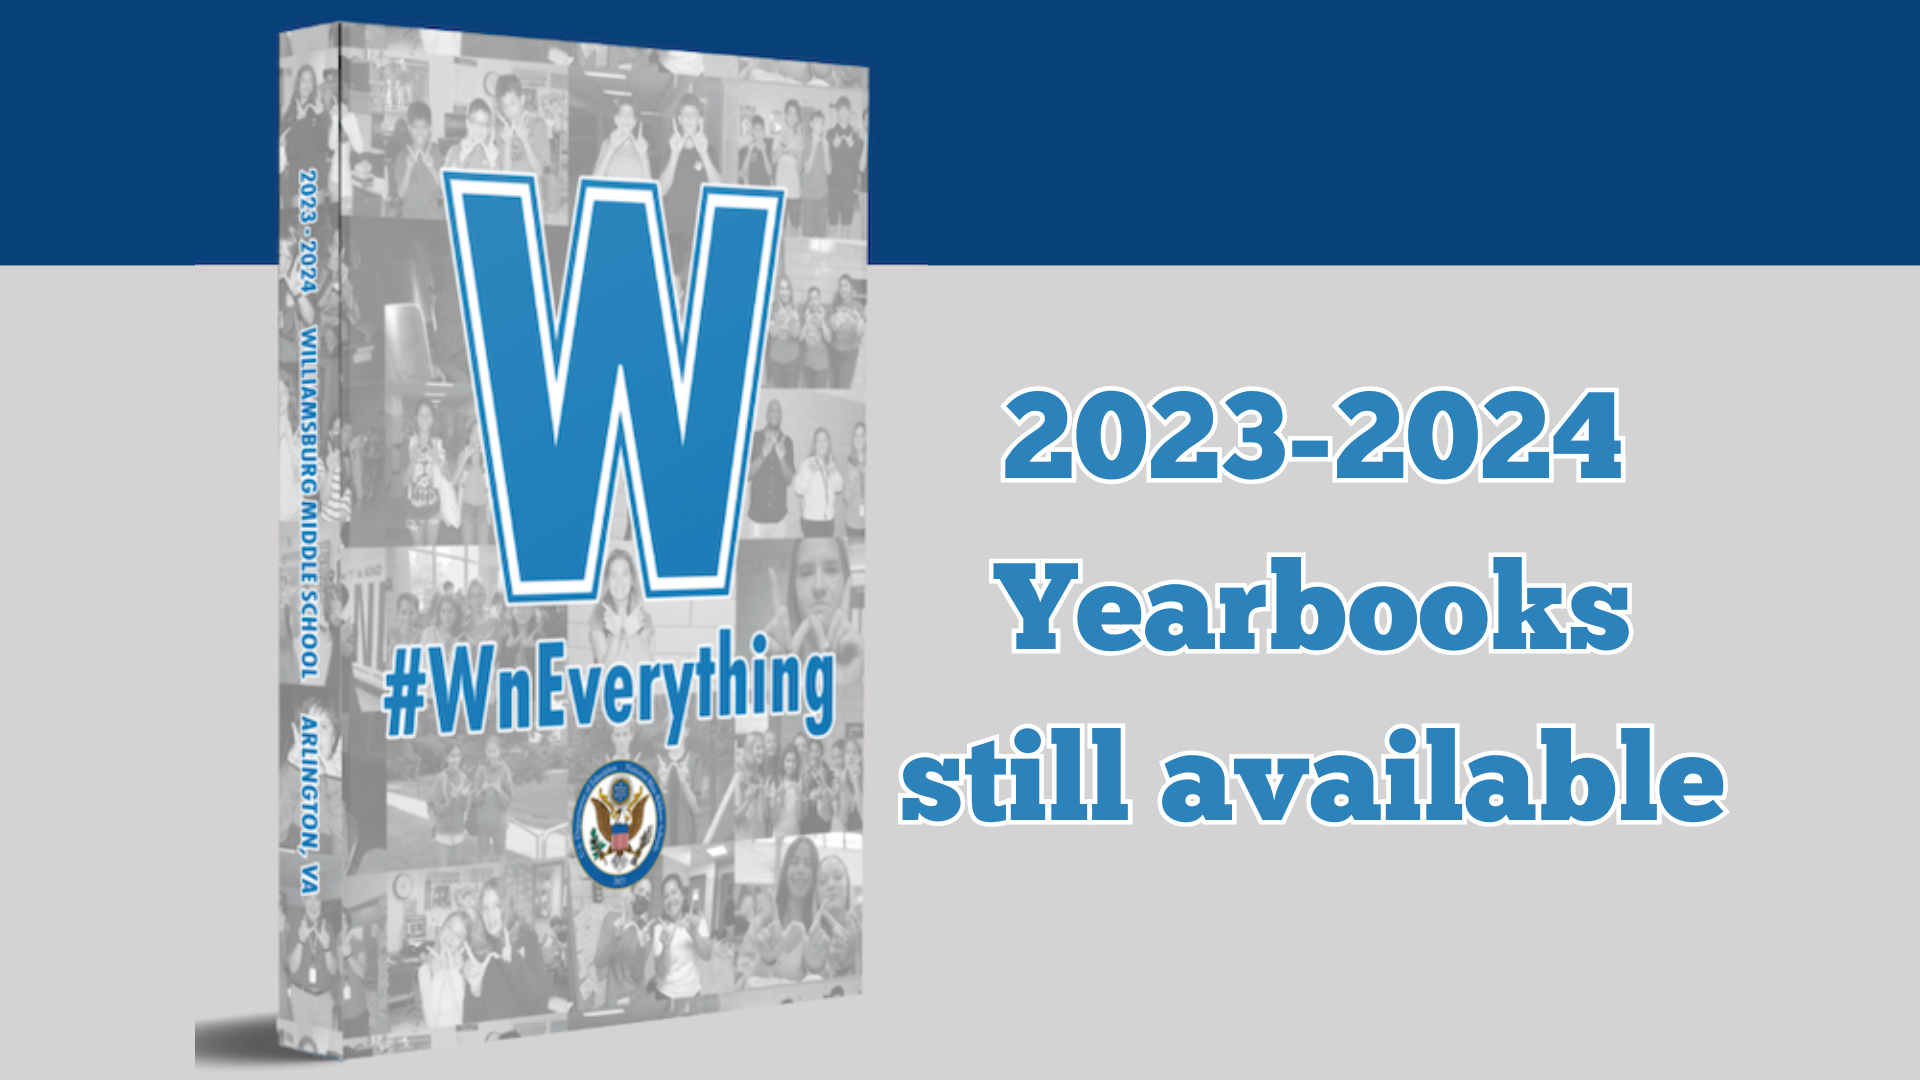 2023-2024 Yearbooks still available